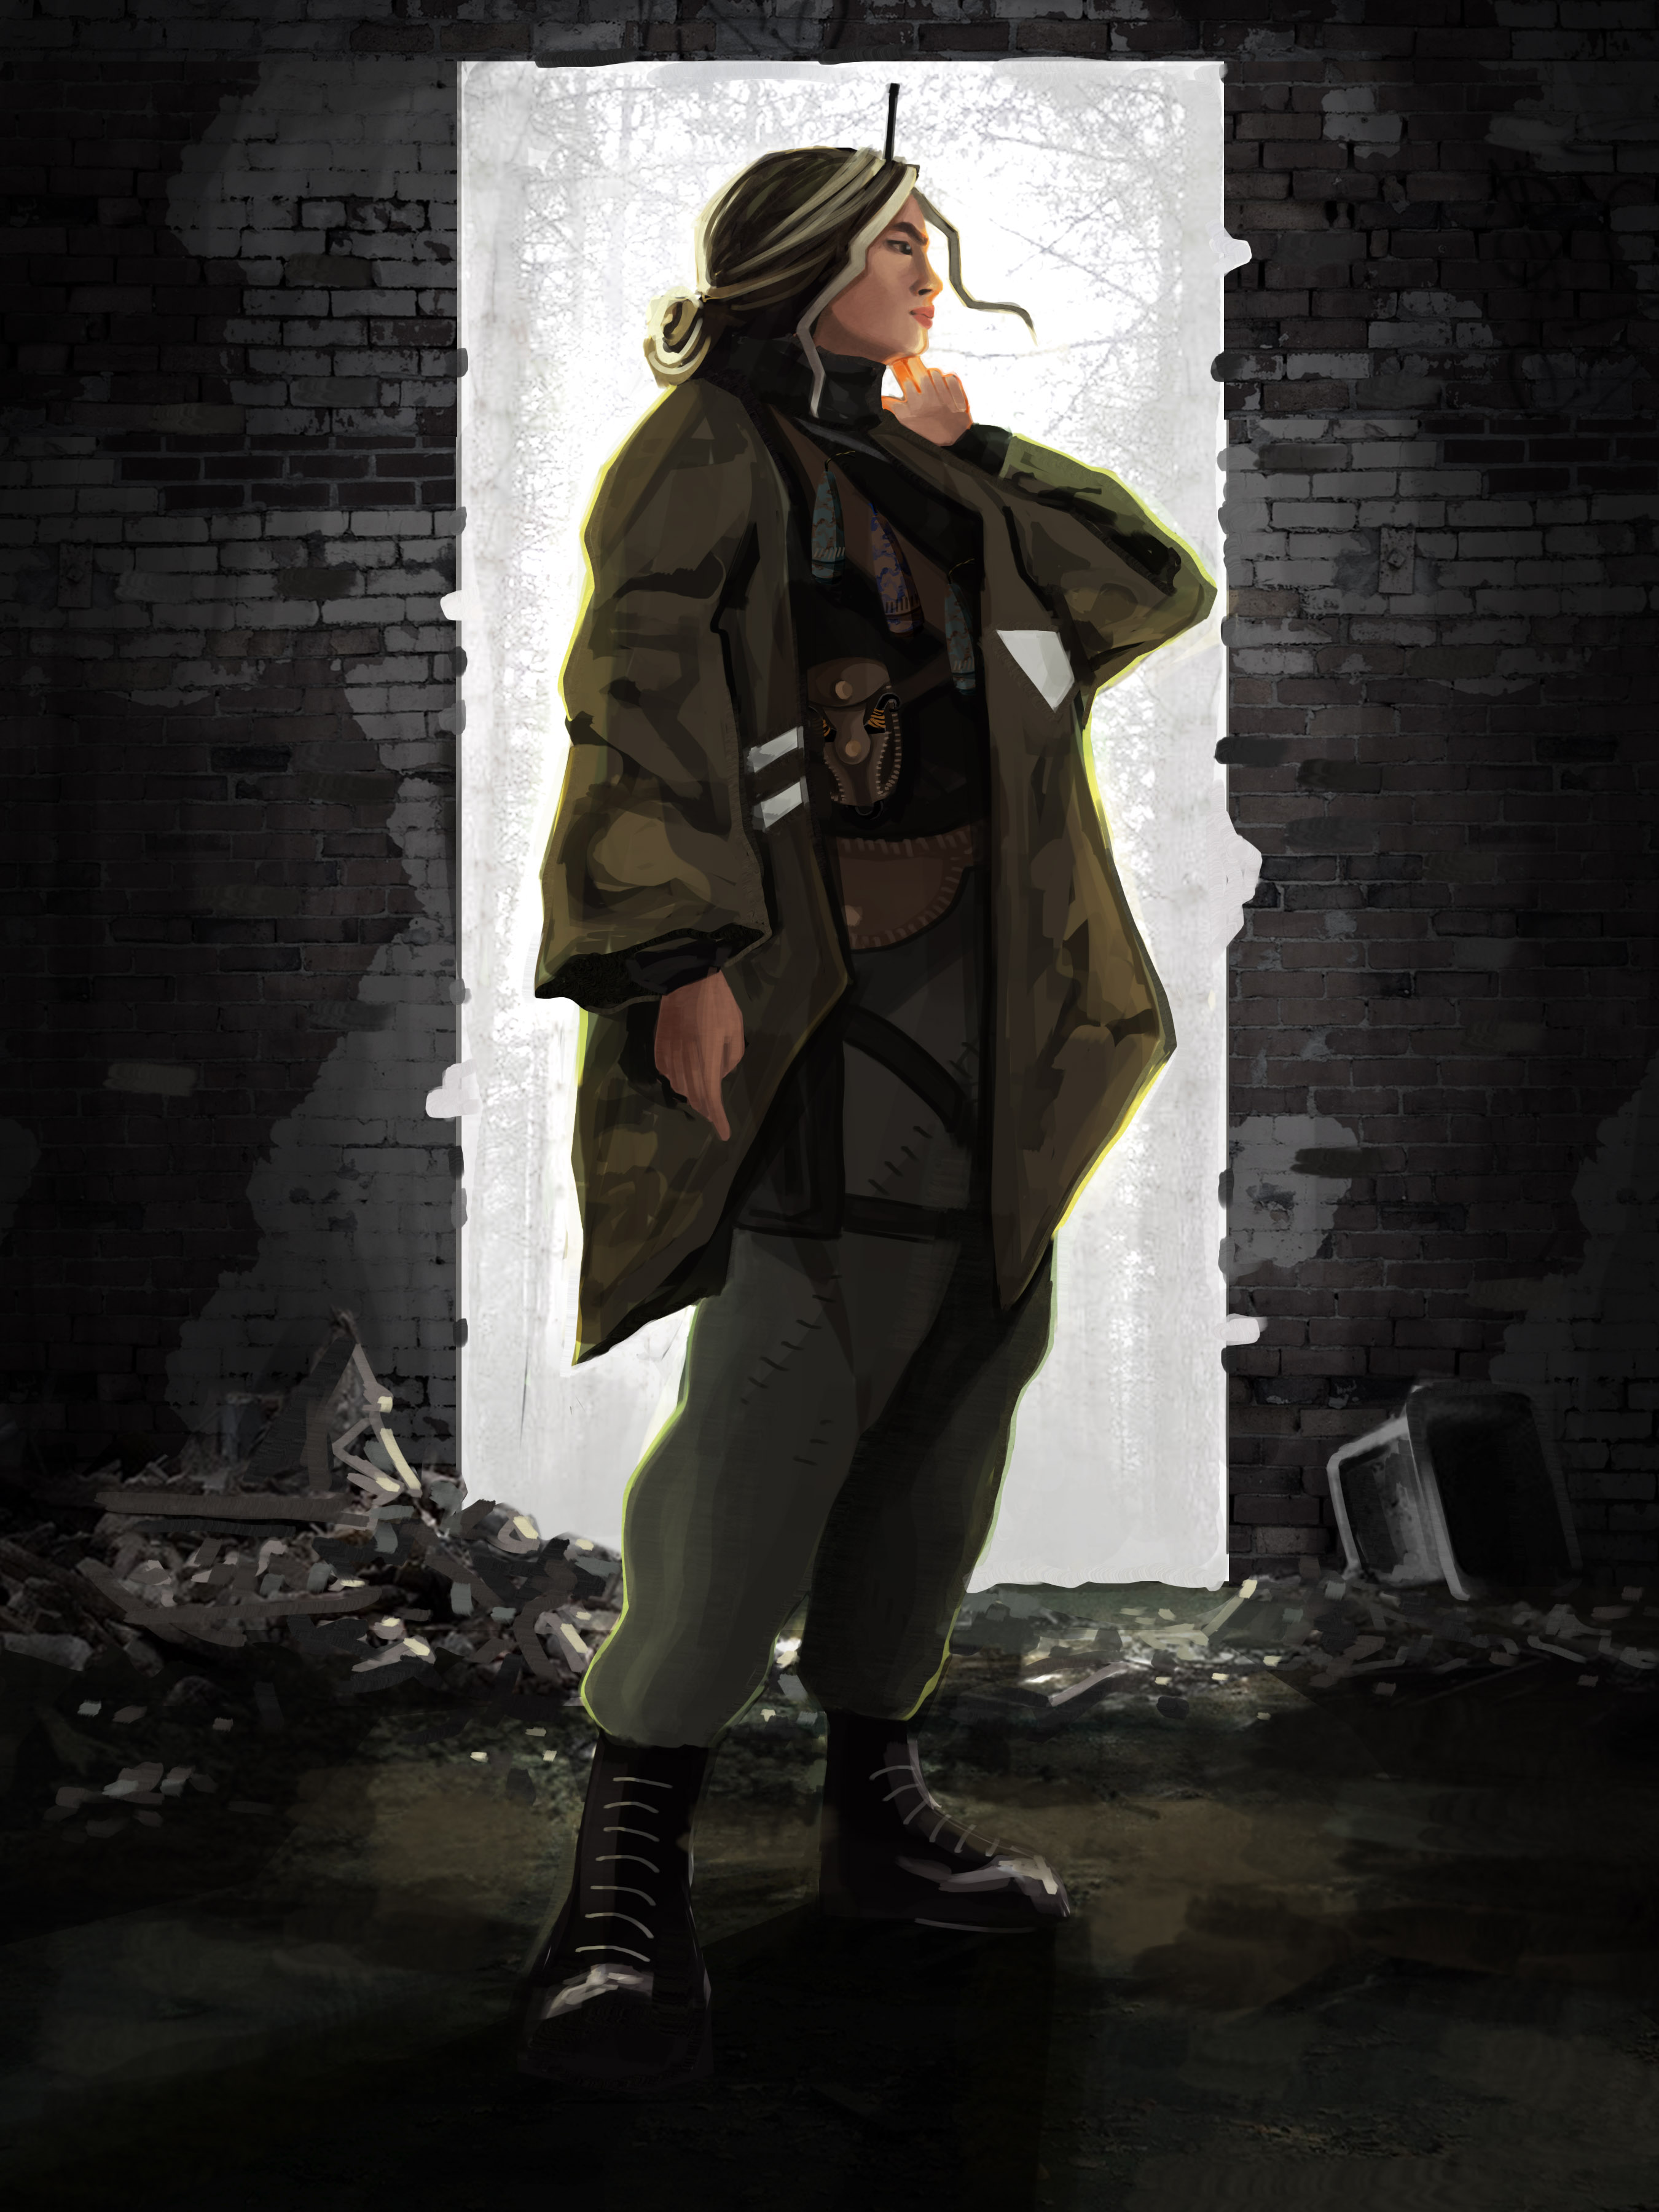 BA Games art character concept by Athina Giannoulatos showing a middle aged military engineer stood in a bright doorway inside a rubble filled brick room.